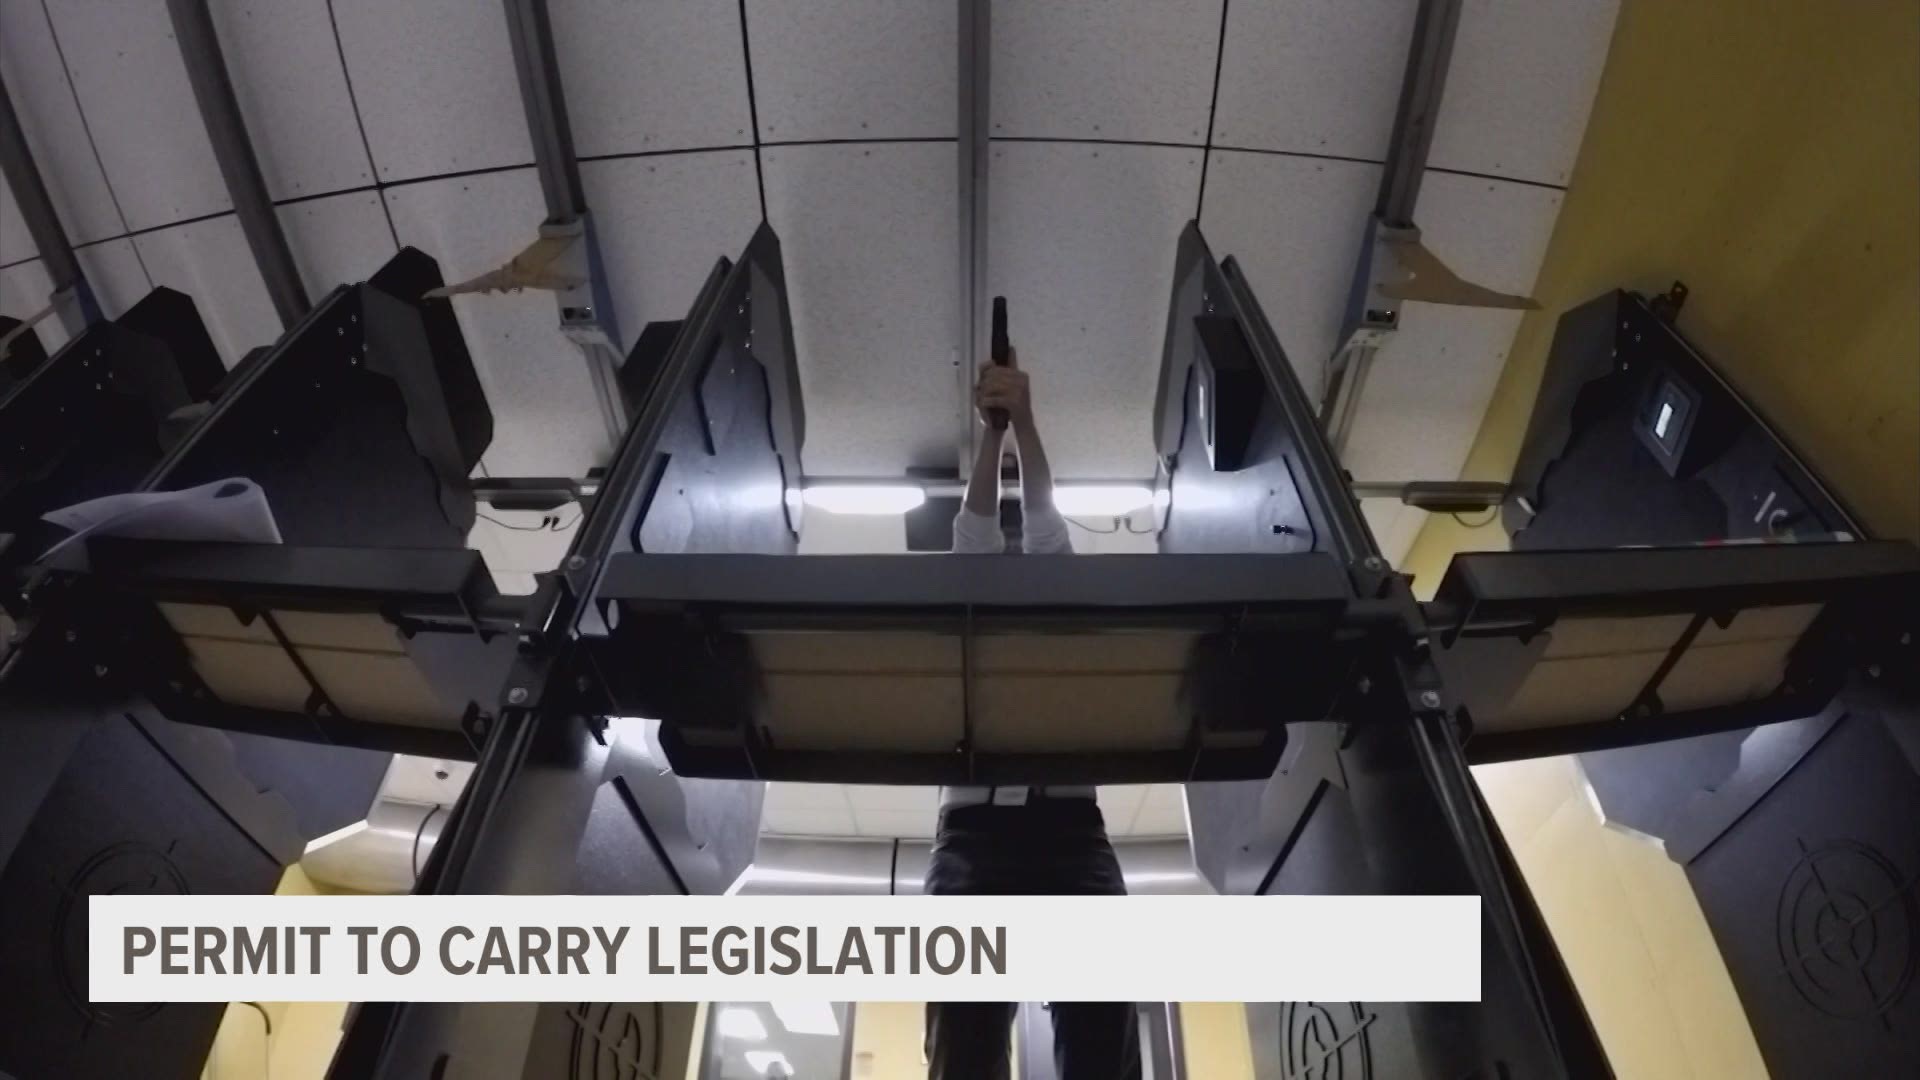 Two U.S. House bills would expand backgrounds checks. The Iowa Legislature has put a bill on Gov. Reynolds' desk to make a permit to carry optional.